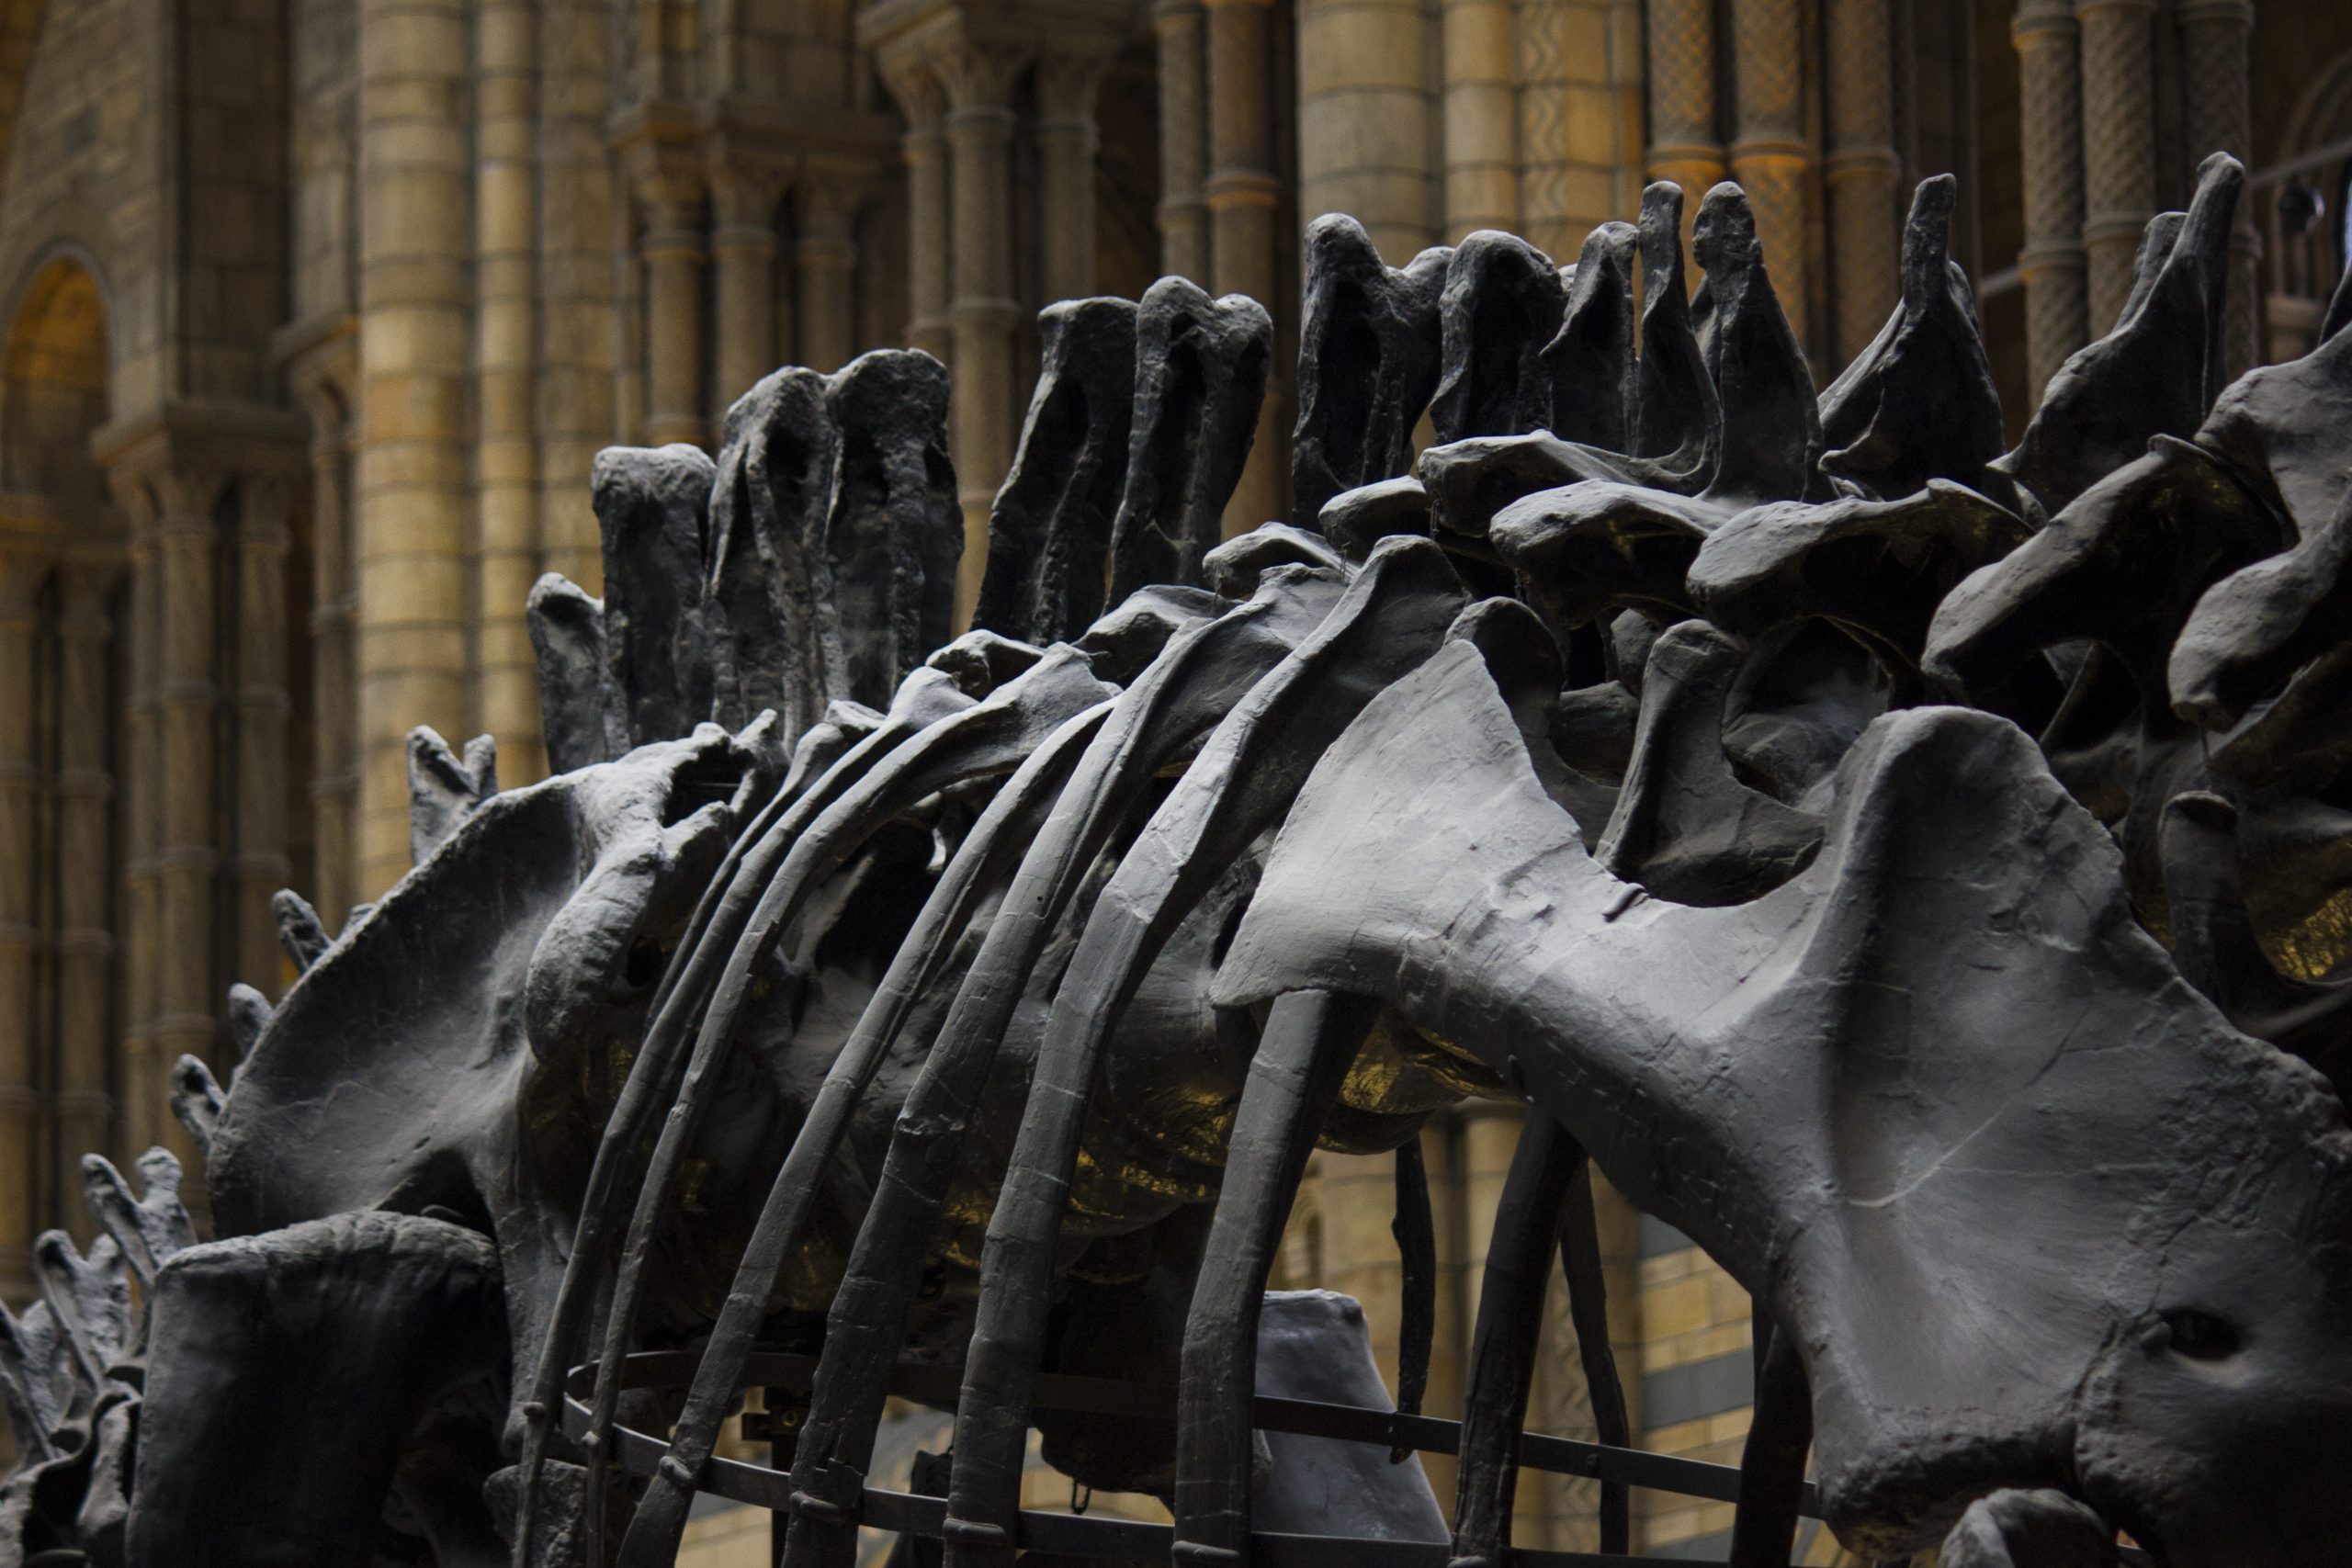 close up of a dark dinosaur spine in the foreground, with a background of stone architecture